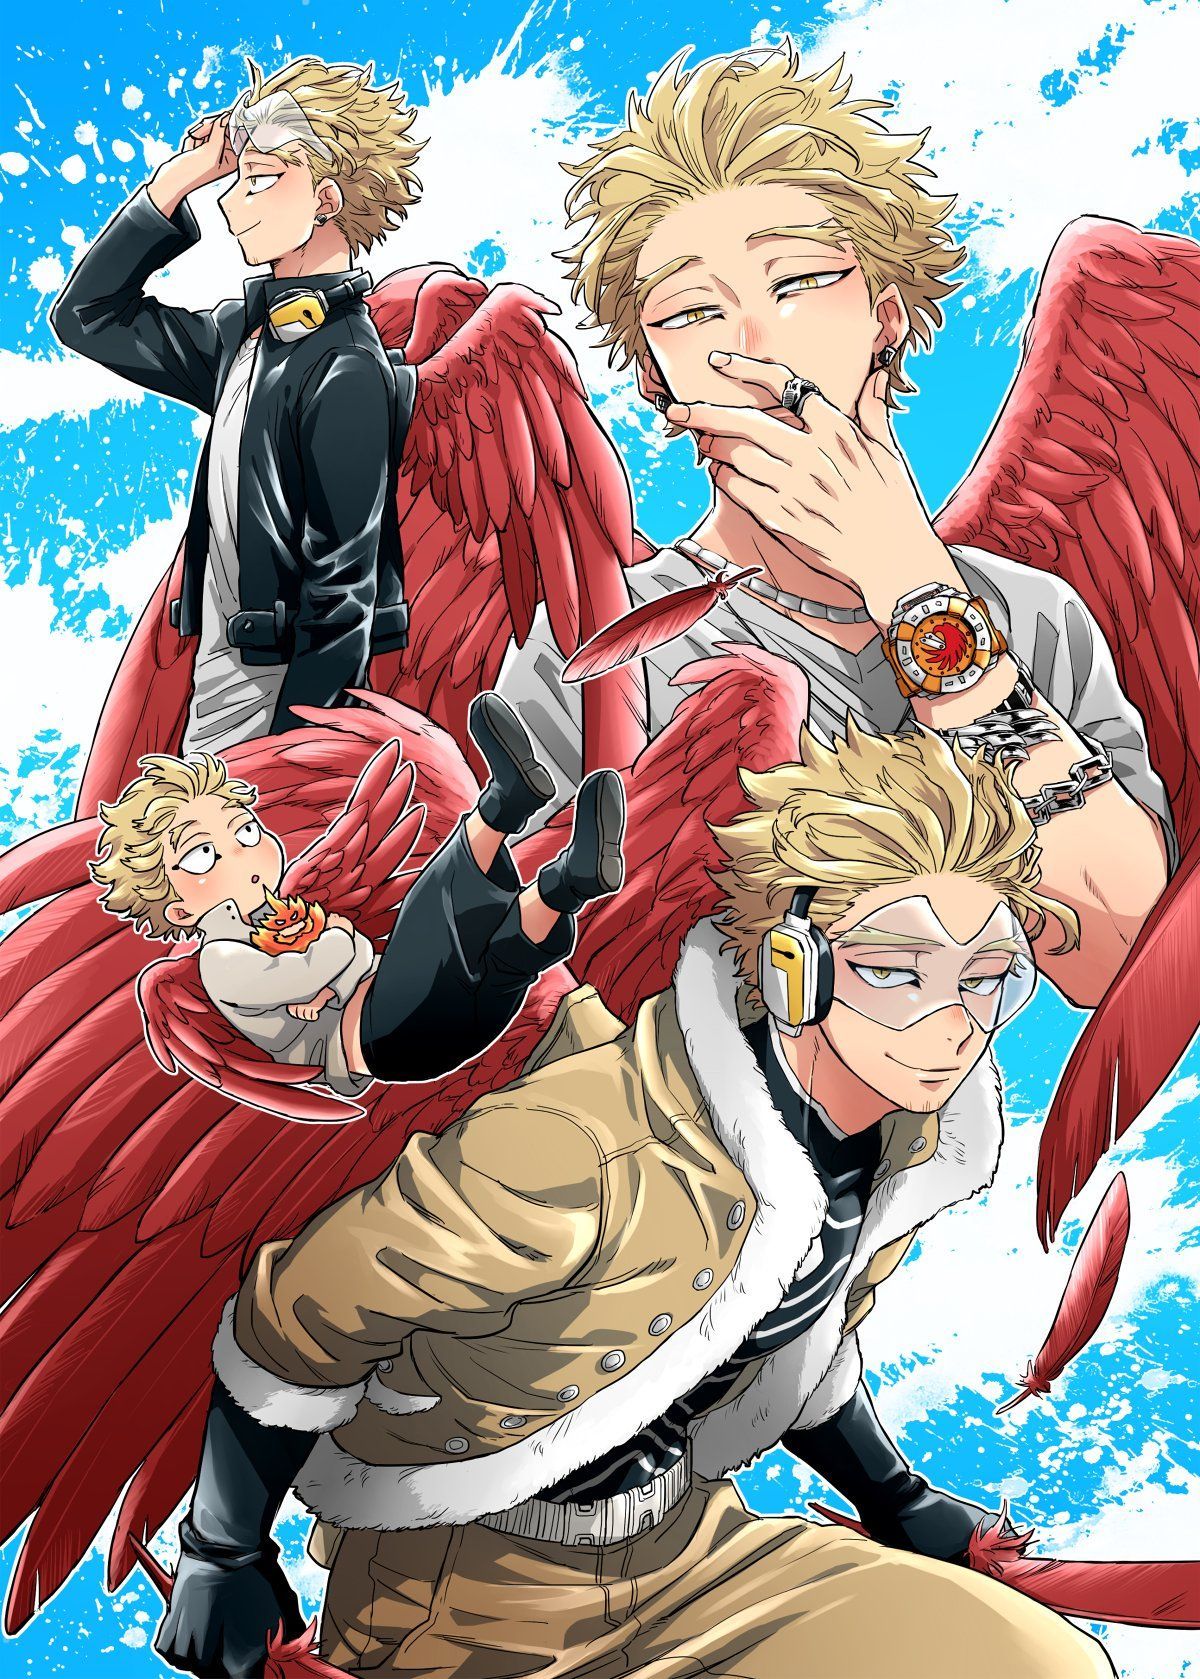 Bnha Hawks Fanart posted by Michelle Sellers.